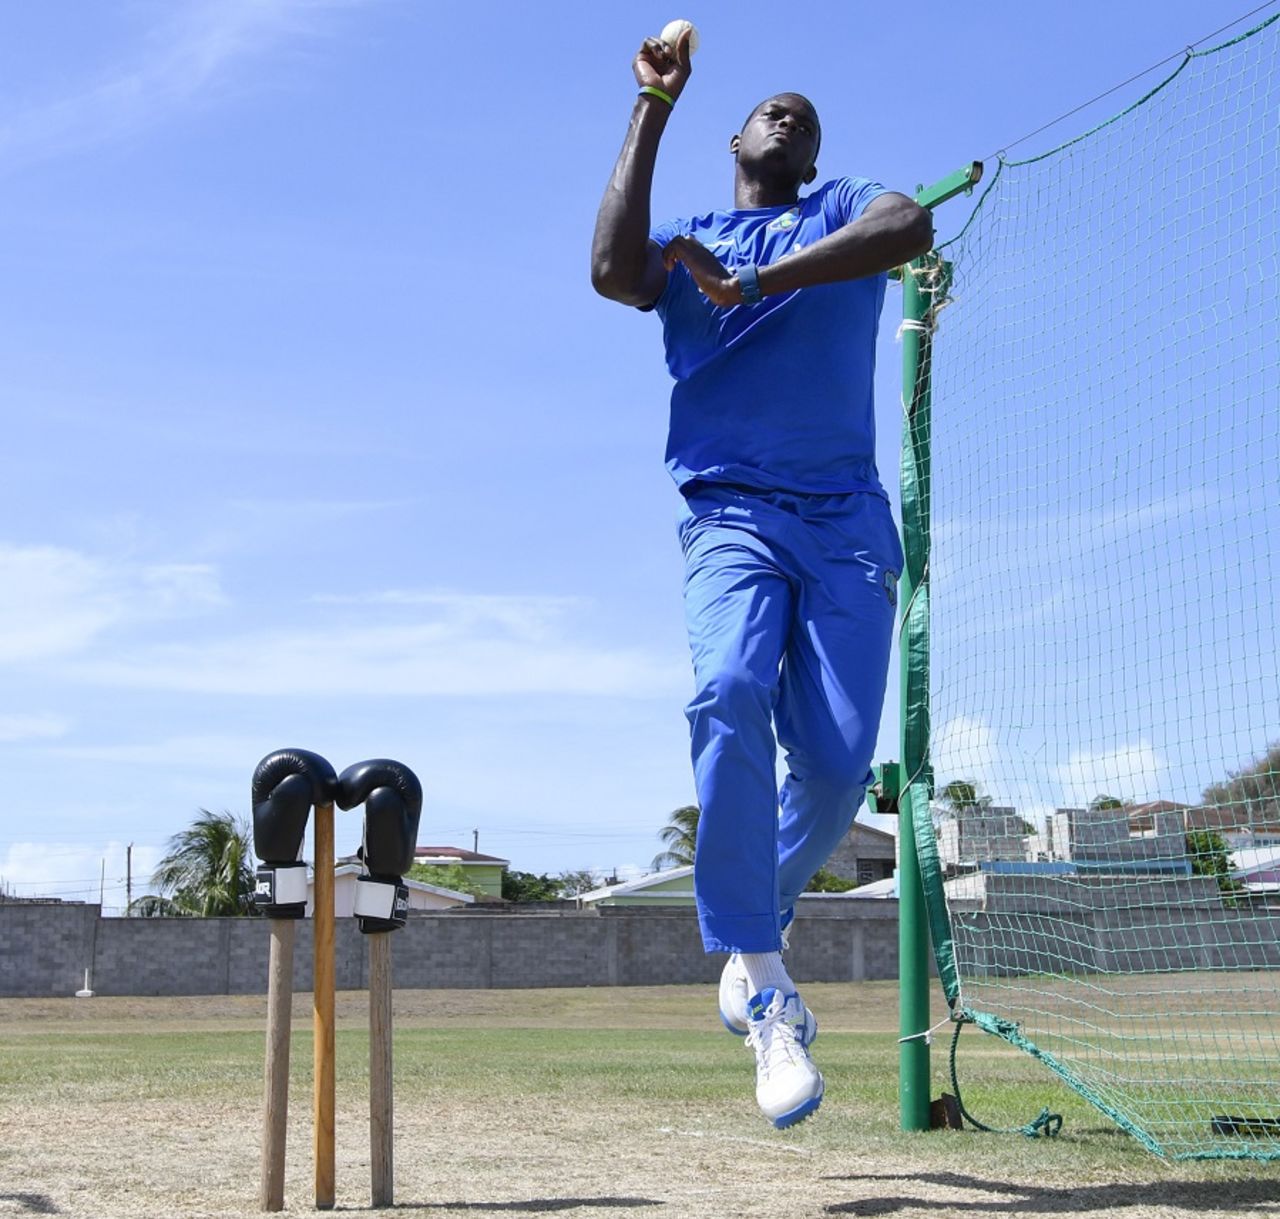 Tribute to Muhammad Ali: Jason Holder bowls in the nets with boxing gloves on the stumps, St Kitts, June 11, 2016